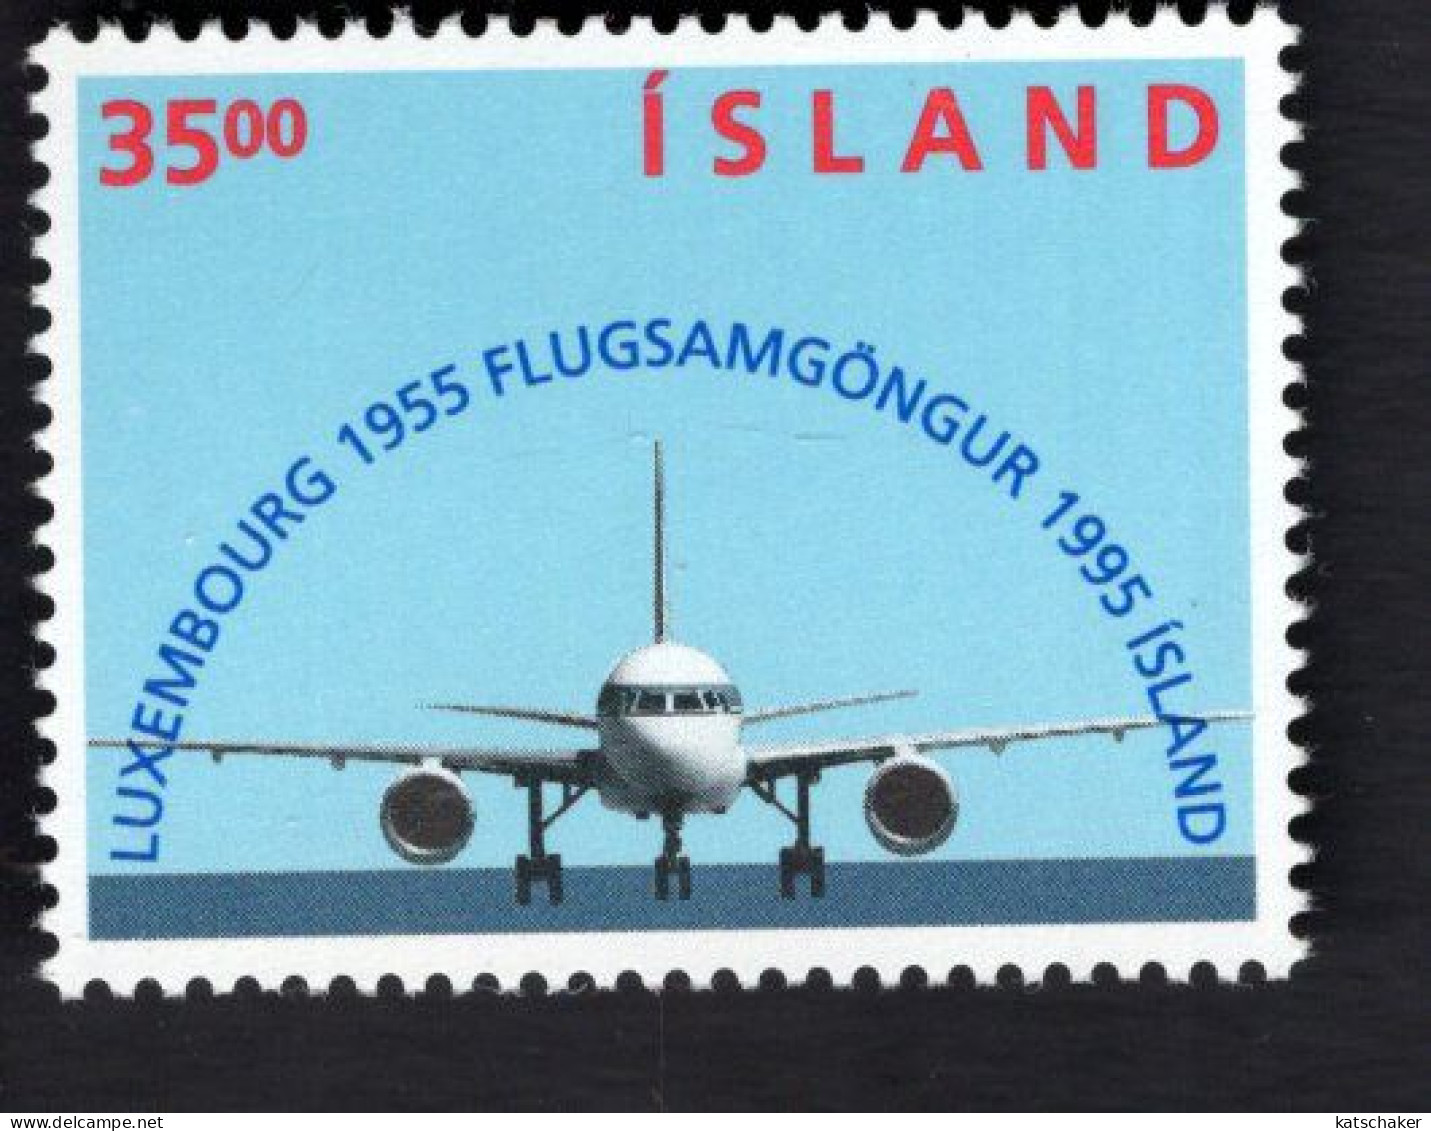 2021899565 1995 SCOTT 807 (XX)  POSTFRIS MINT NEVER HINGED - LUXEMBOURG-REYKJAVIK ICELAND AIR ROUTE - 40TH ANNIV - Unused Stamps